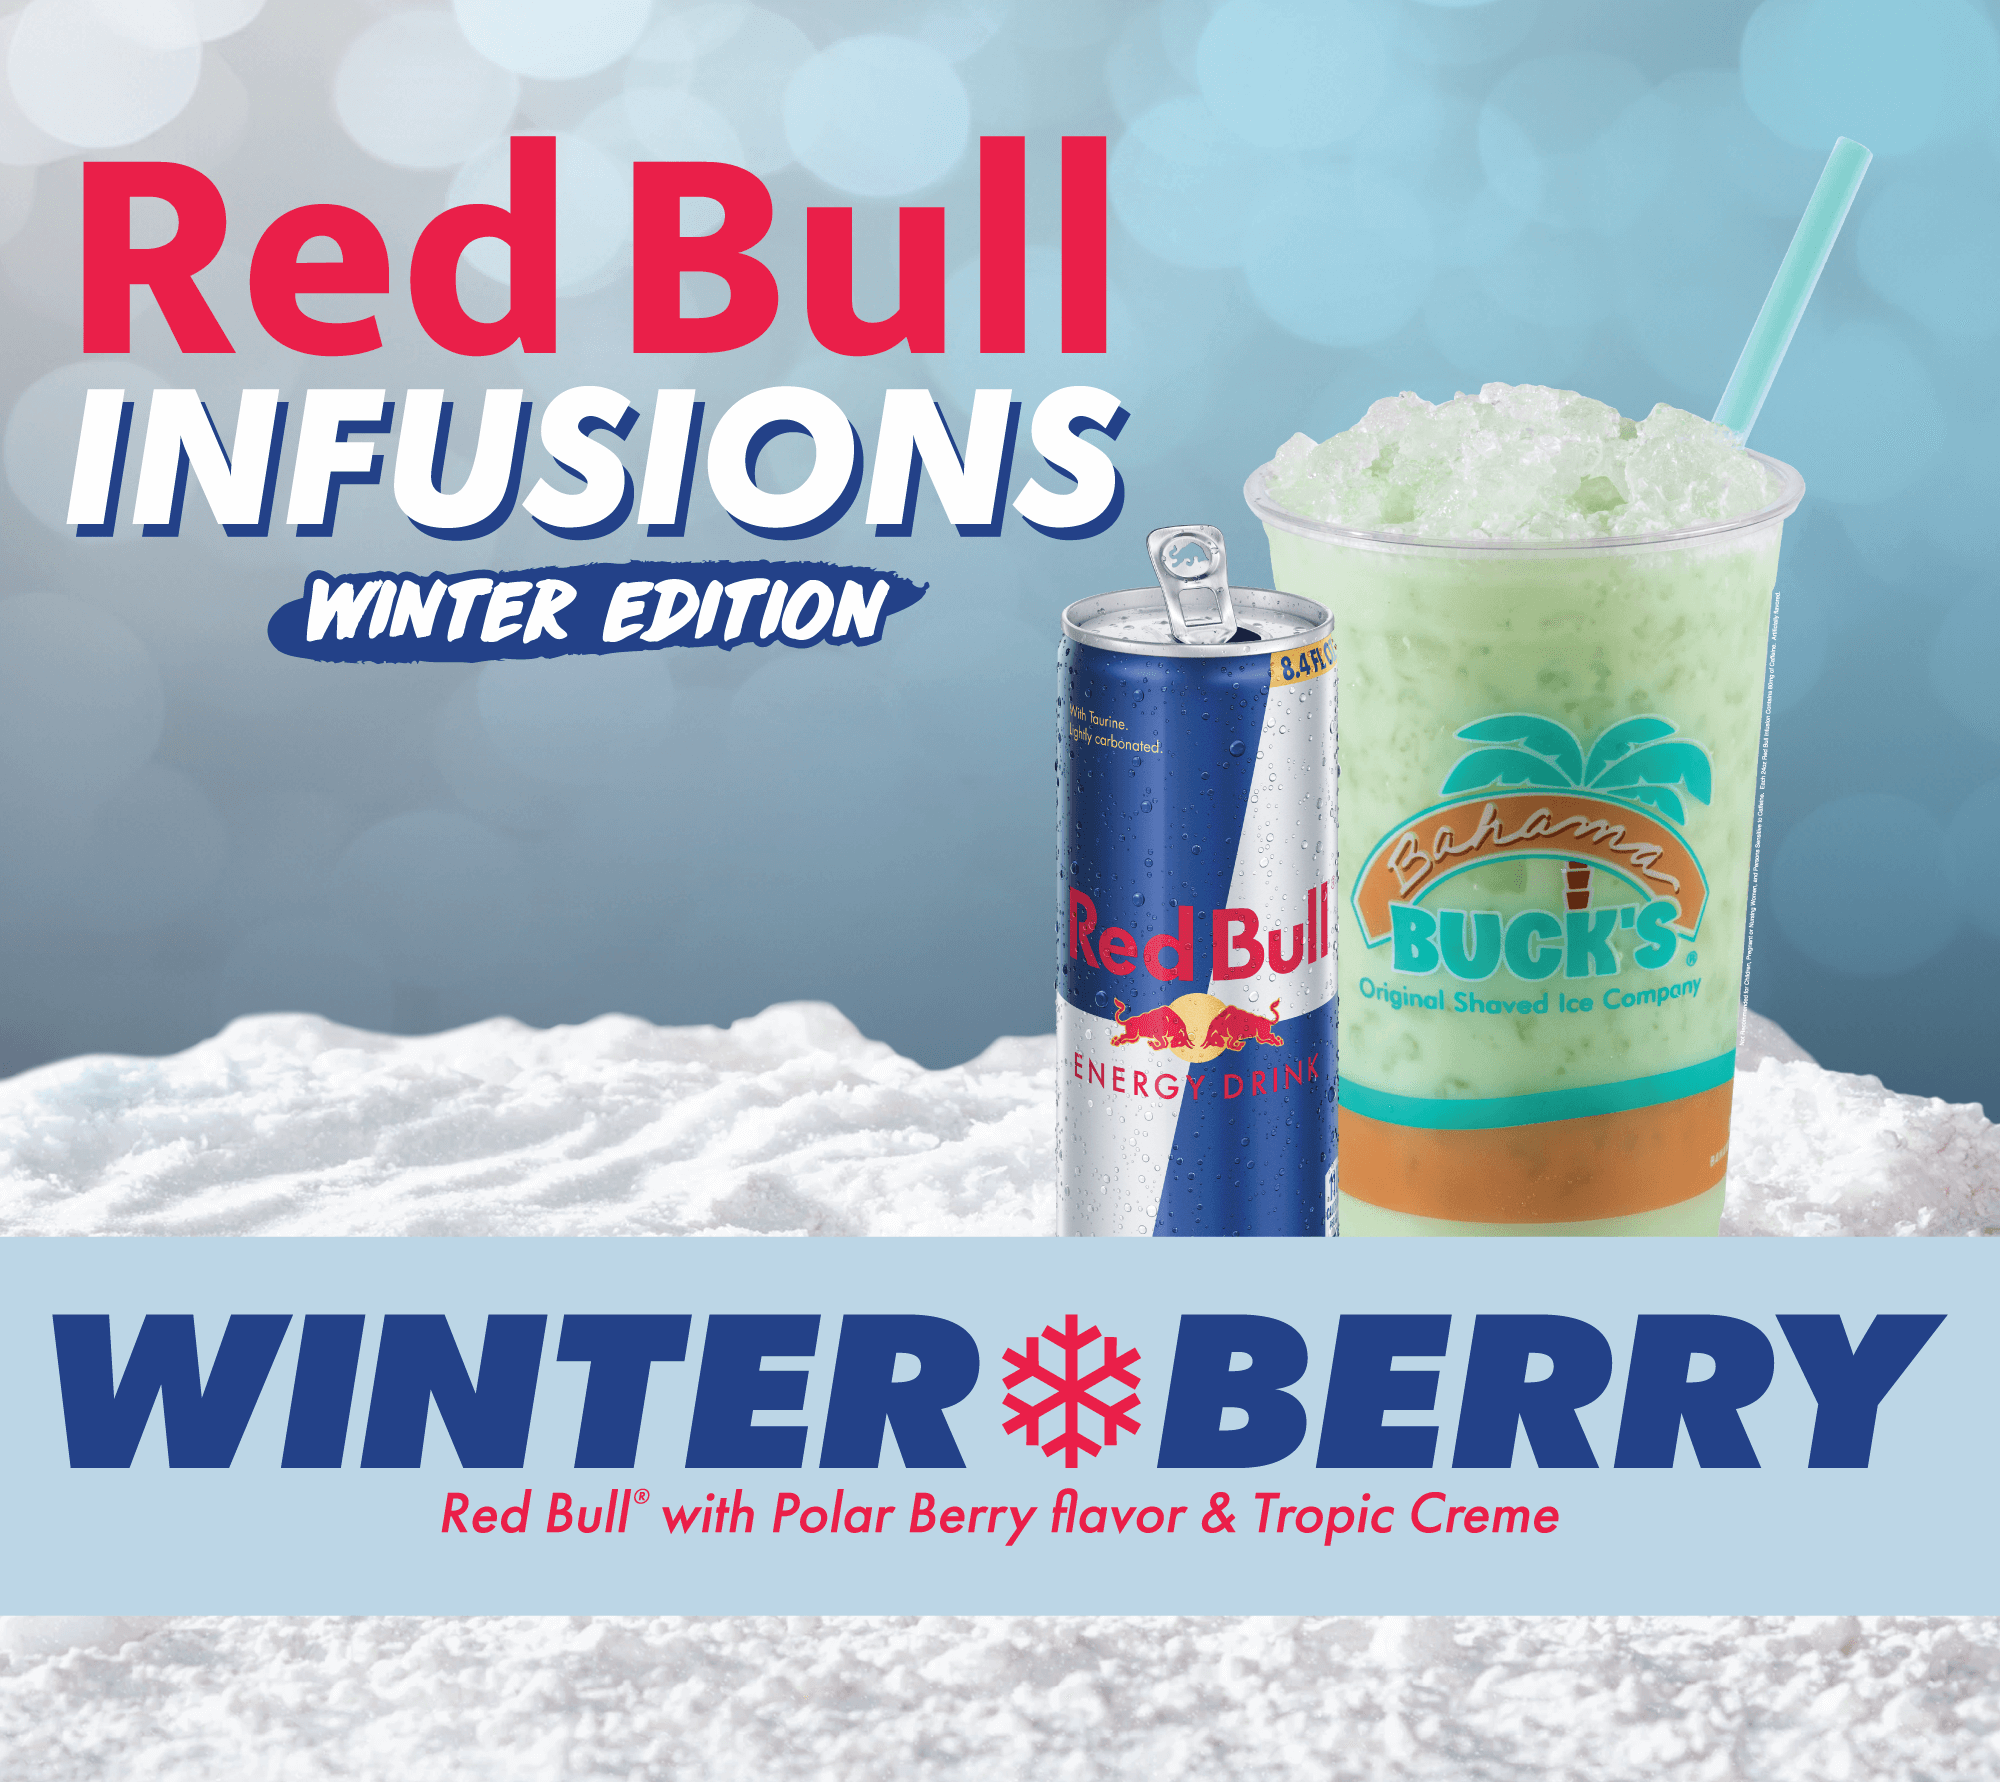 Winter_Berry-RedBull_Infusion_Promo